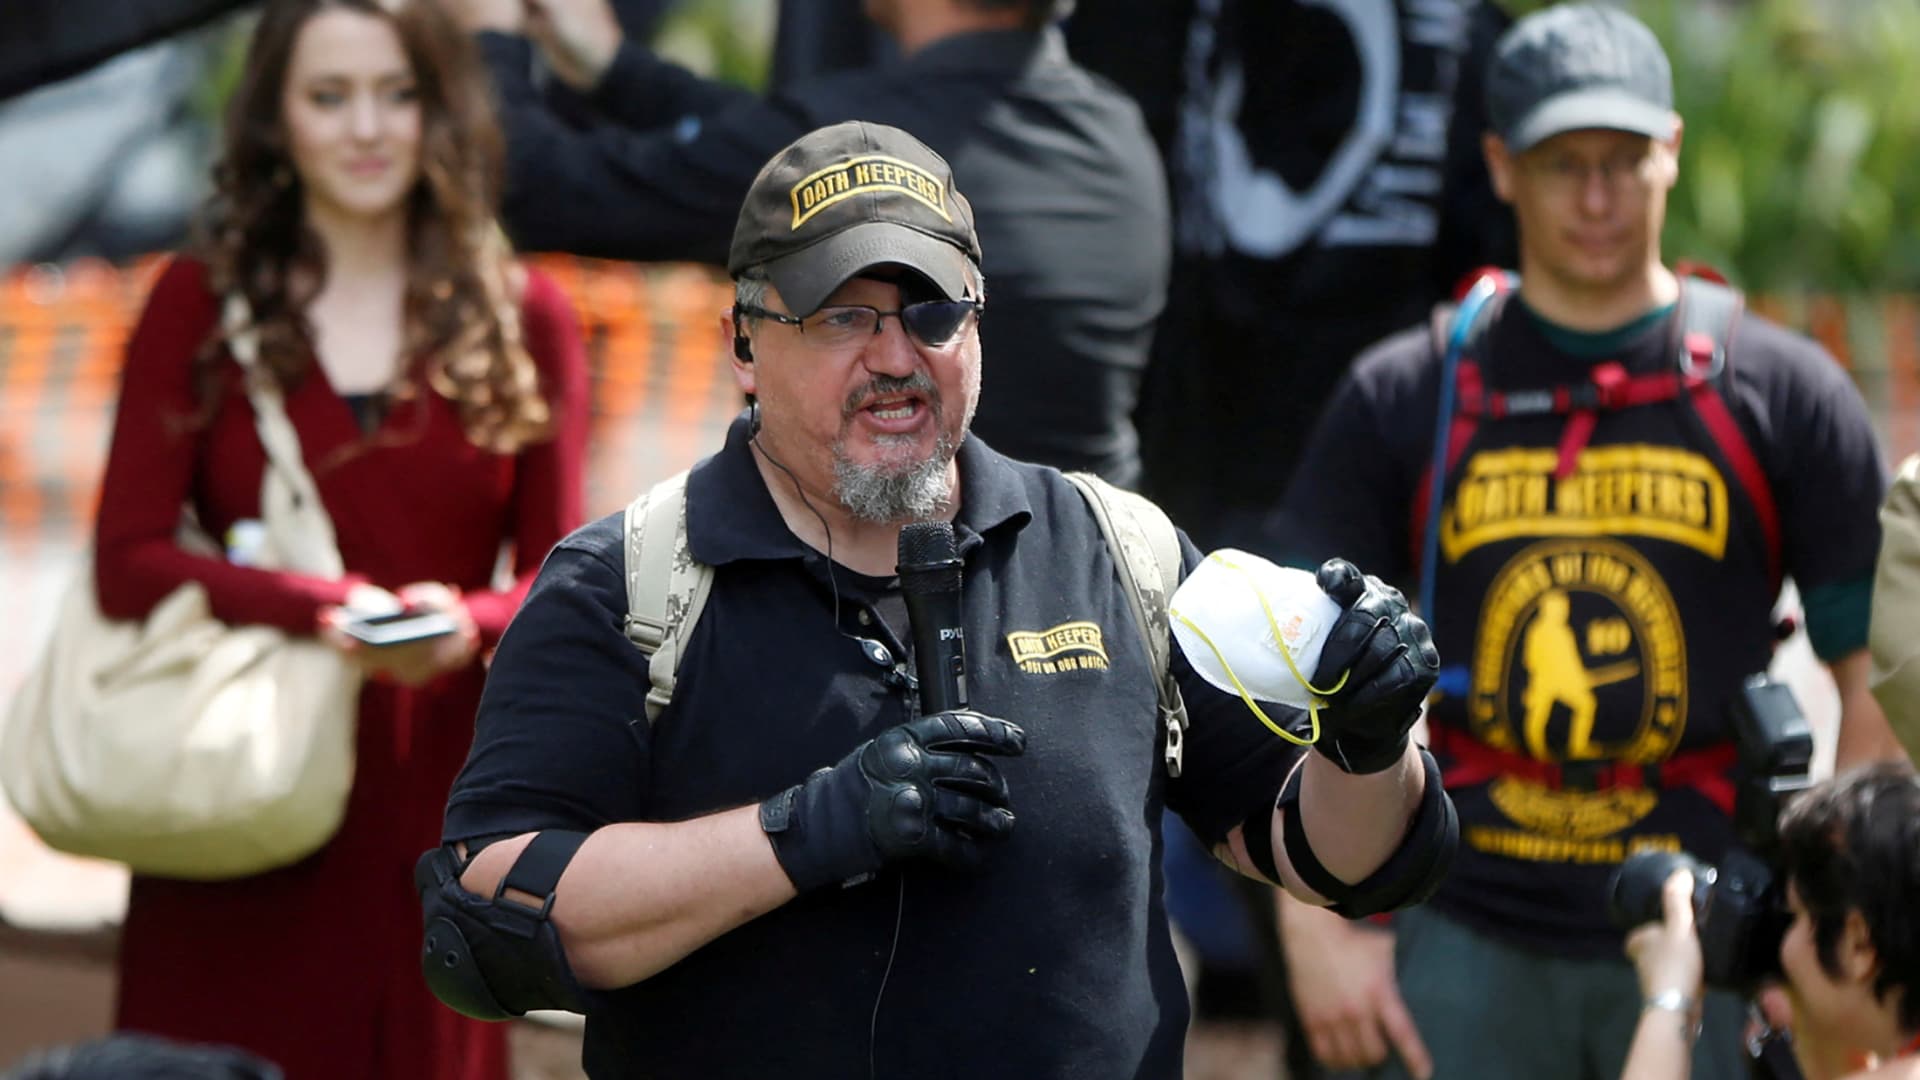 Oath Keepers founder, Stewart Rhodes, speaks during the Patriots Day Free Speech Rally in Berkeley, California, U.S. April 15, 2017.